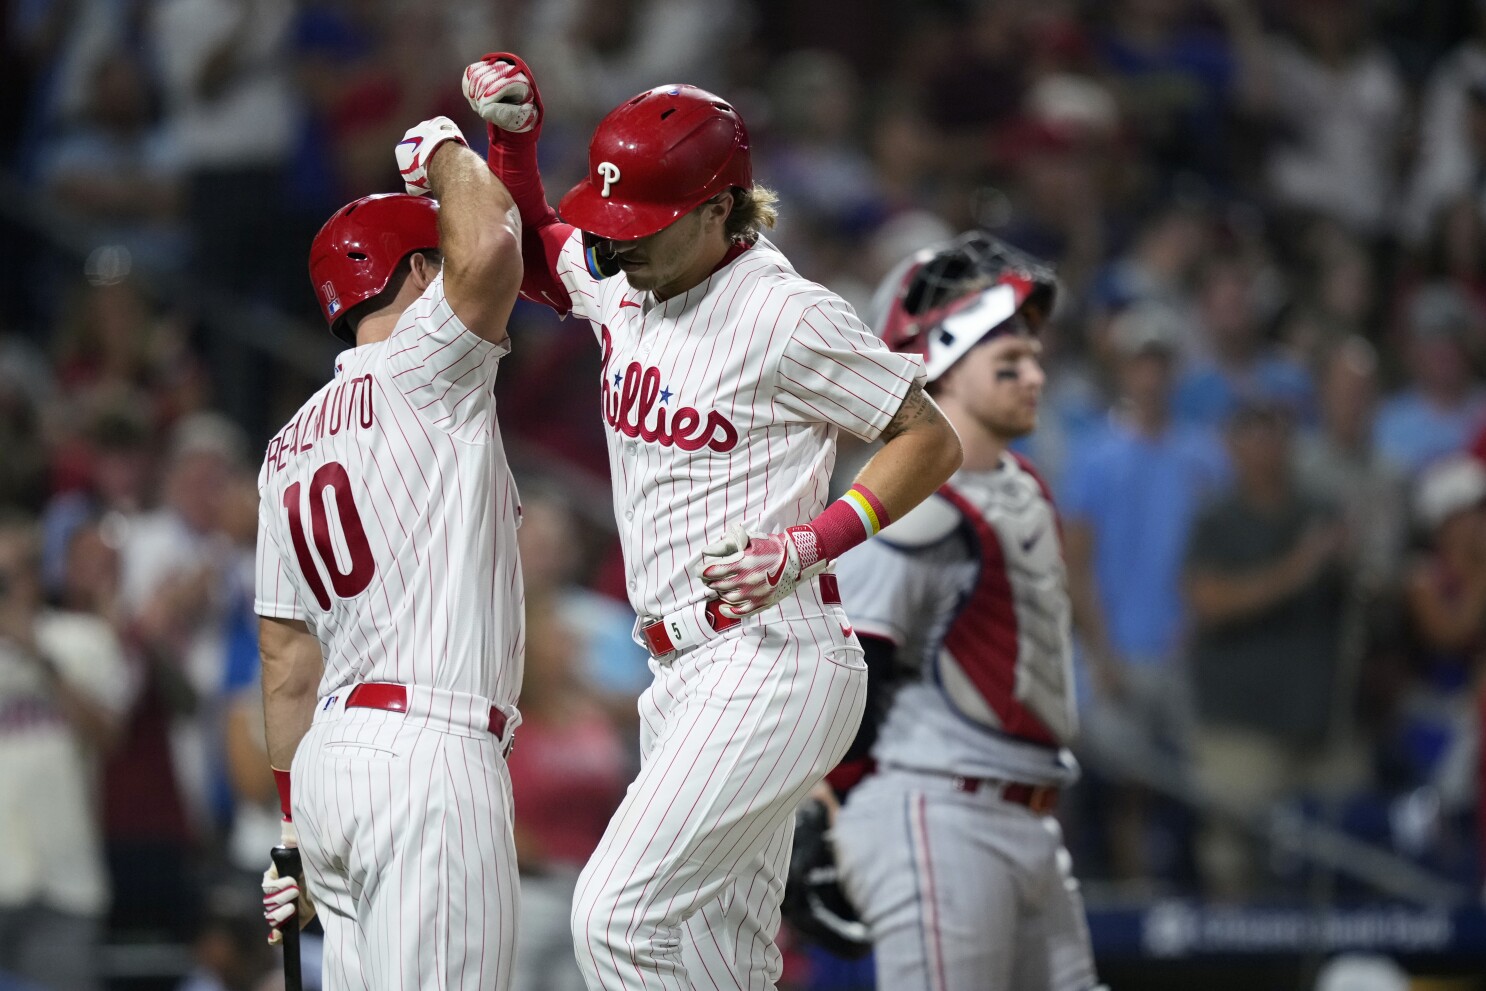 The Philadelphia Phillies' Offense Is Heating Up As They Take 2 Of